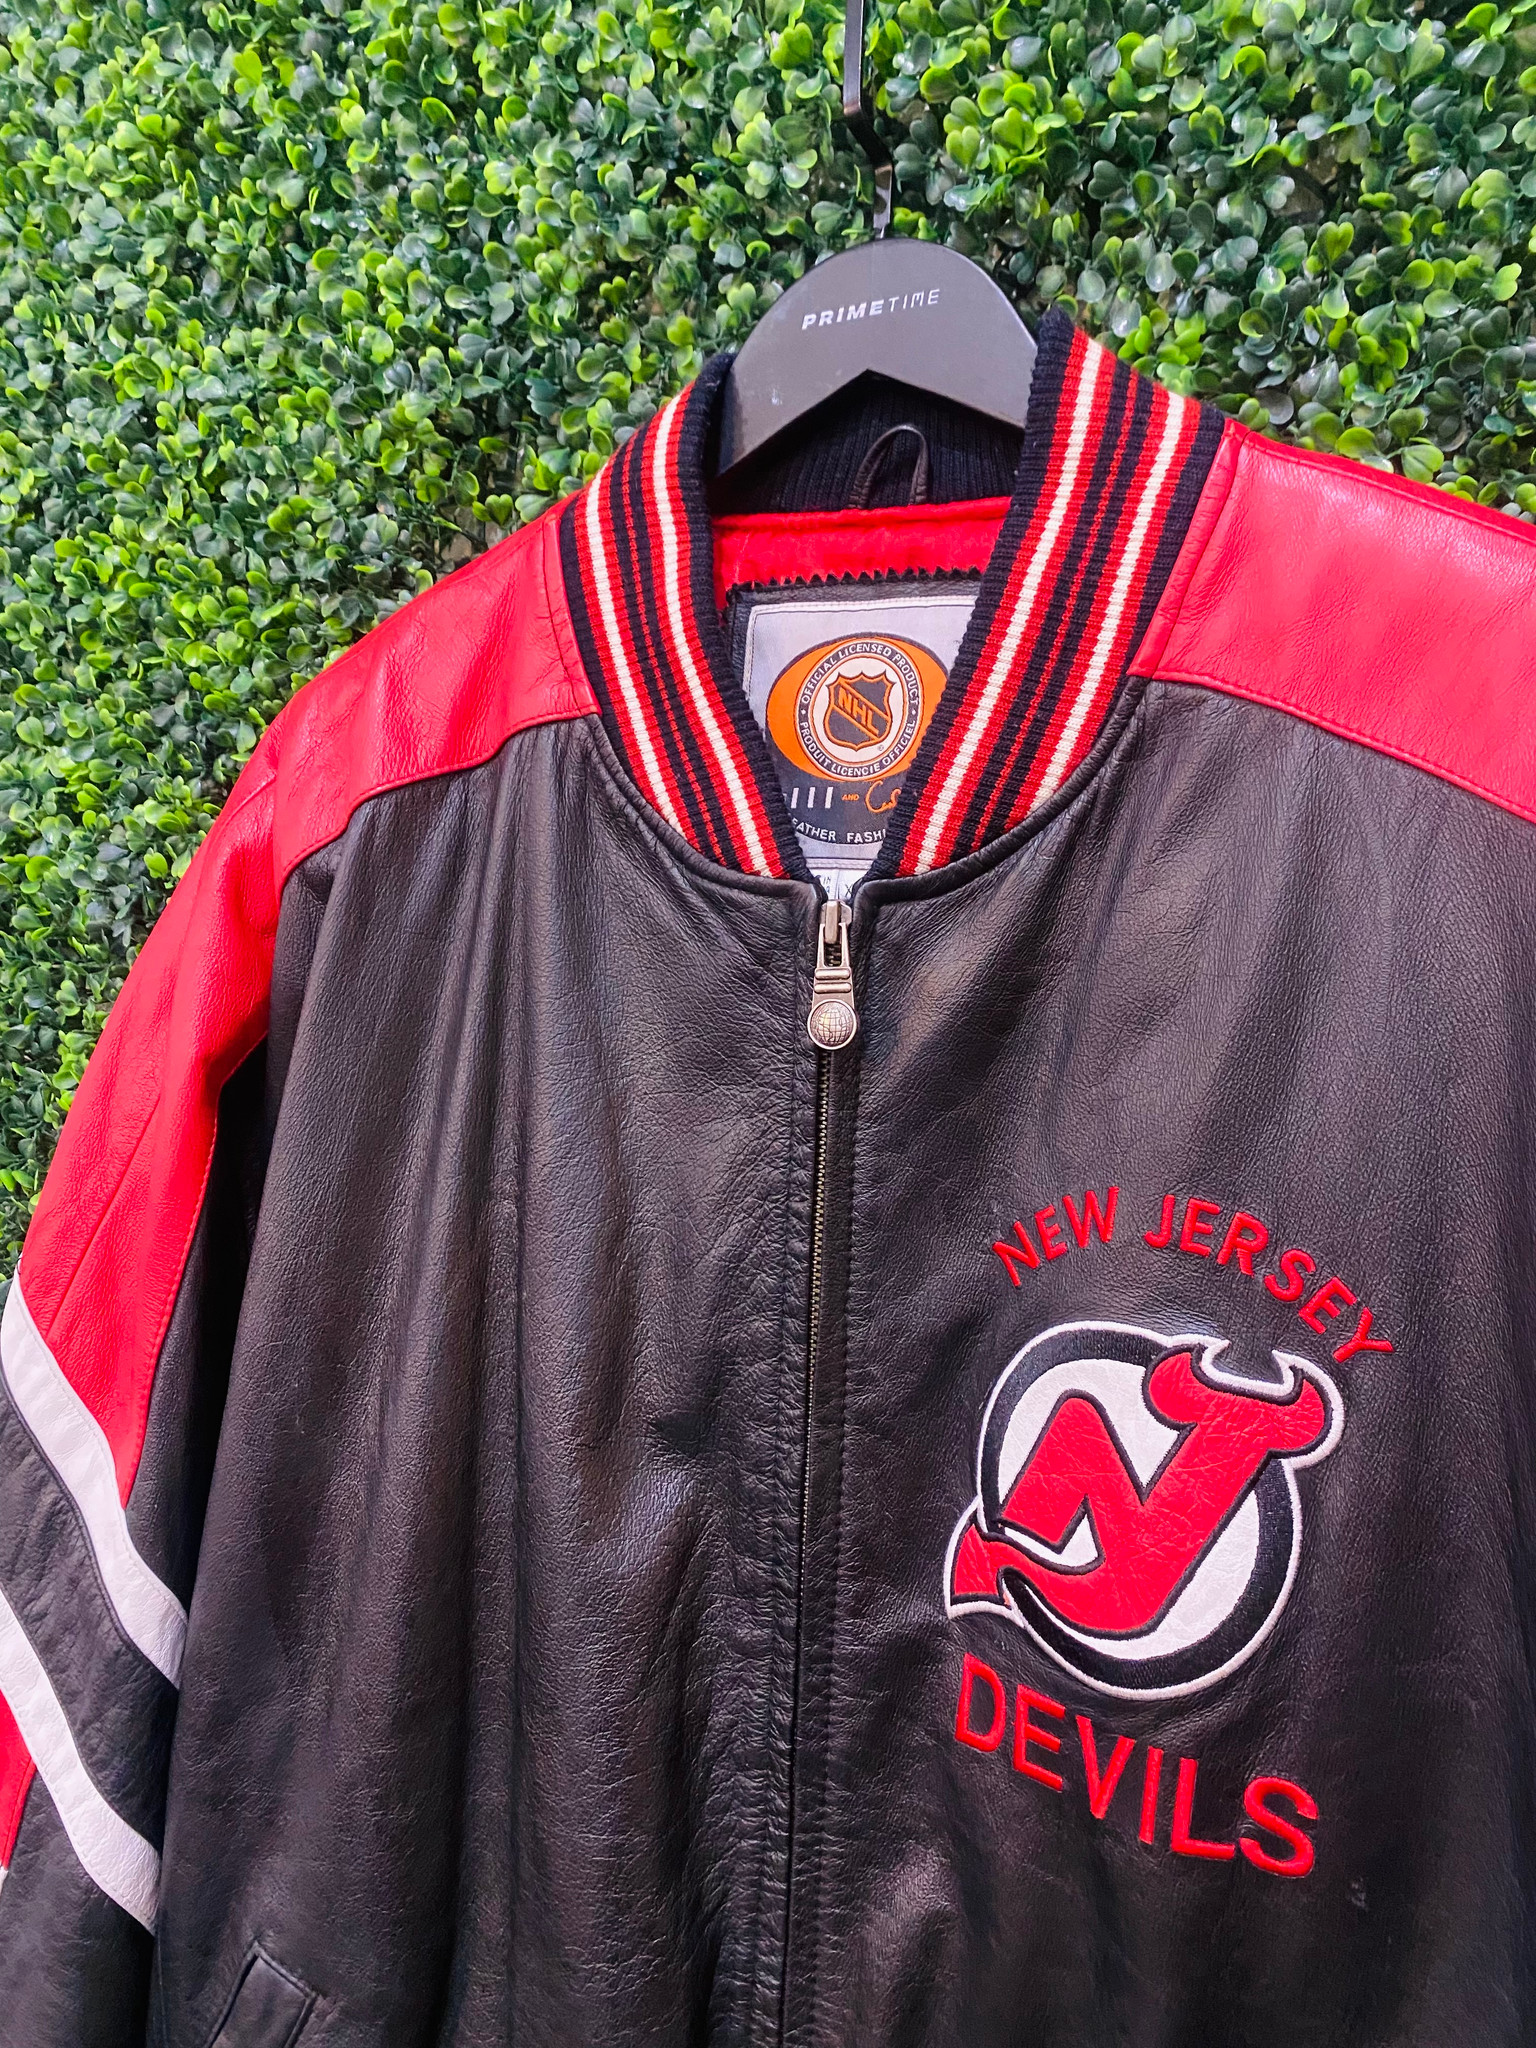 Vintage NJ Devils jacket Large. New w/o tags - sporting goods - by